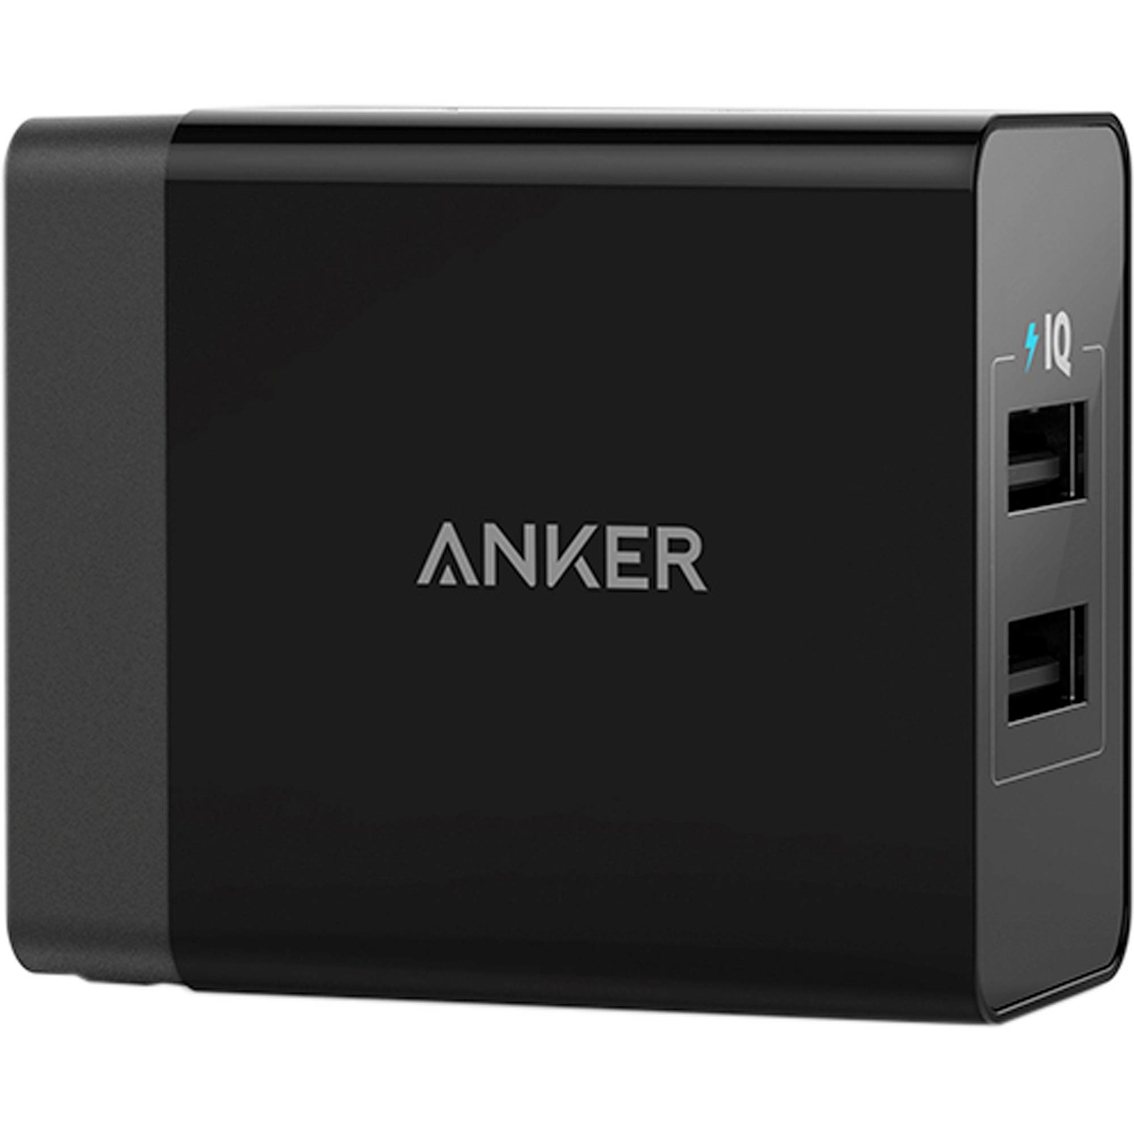 Anker 24W 2 Port USB Charger - Image 2 of 6